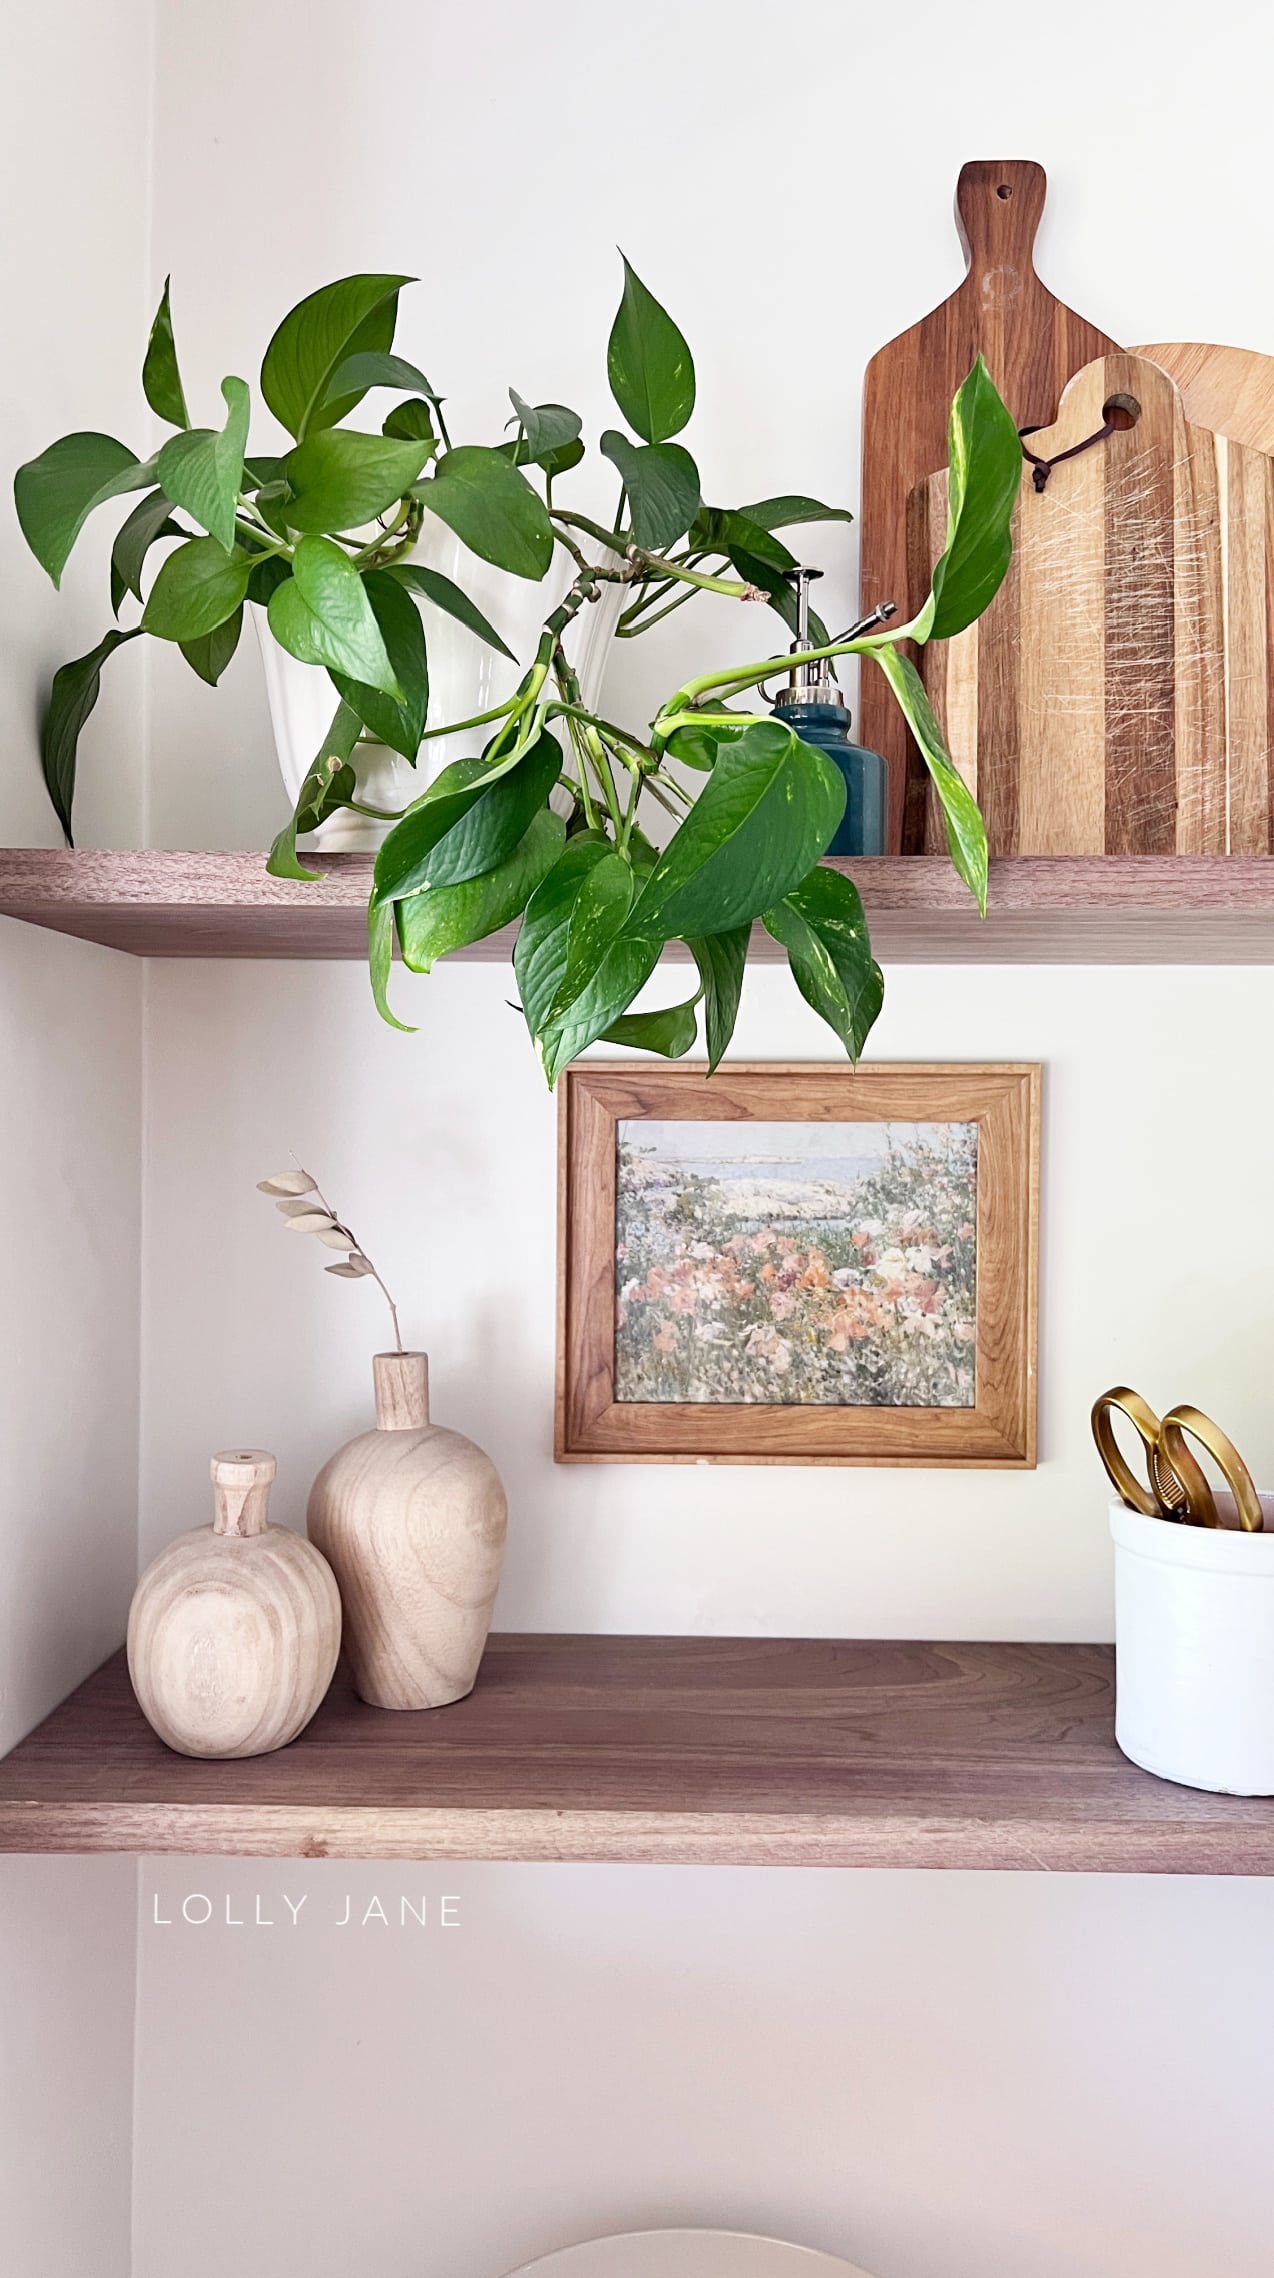 Add a thrifted wood frame with a floral print to open kitchen shelves for easy decor! Up your home decor with thrifted frames and digital art to create custom art for your home.